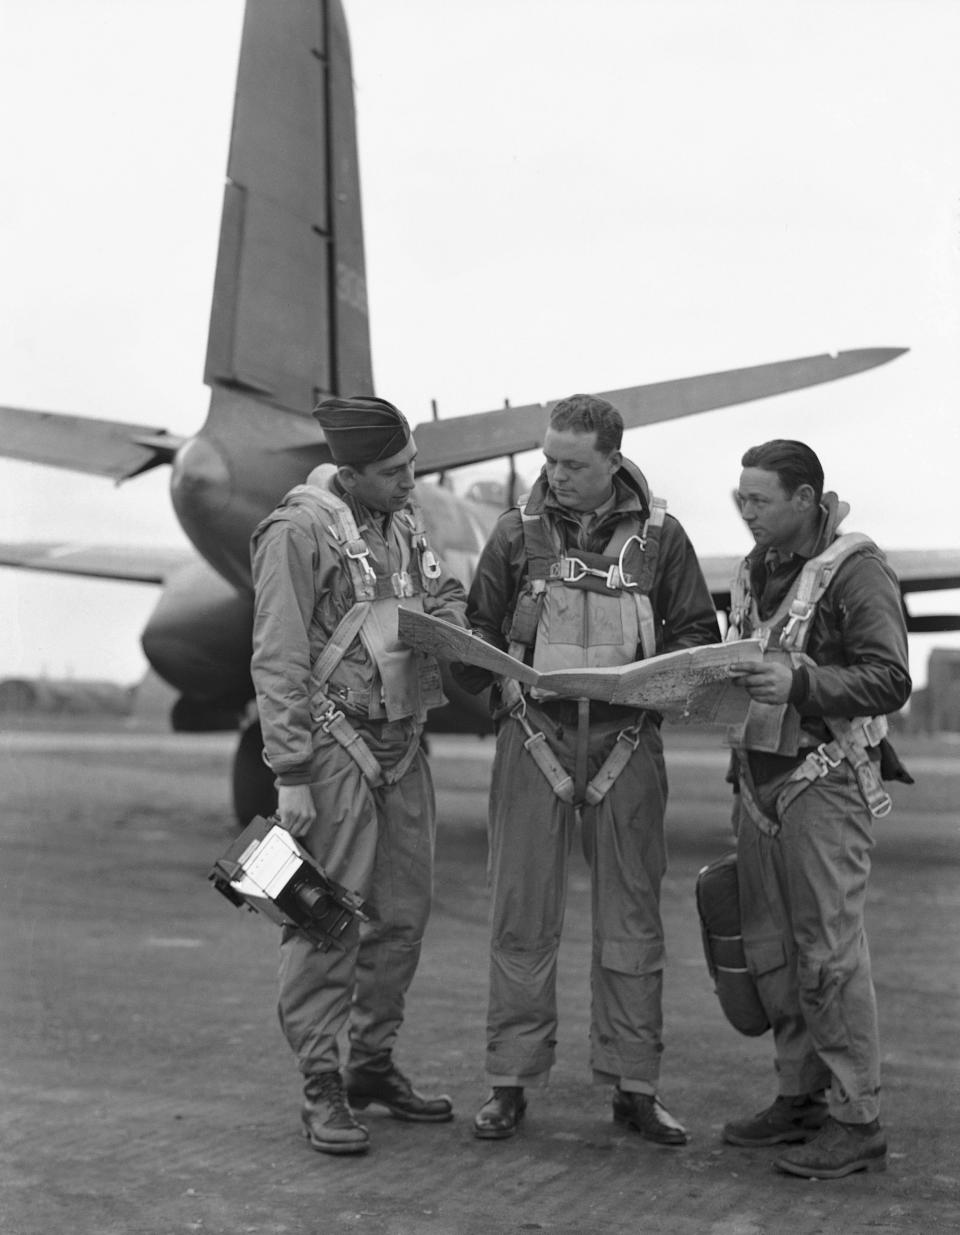 FILE - Associated Press photographer Bede Irvin, left, studies a map of Europe with A-20 bomber pilot Major A.R. Milow, Jr., center, and top-turret gunner S/S Albert Grimsla, right, at an air base in England, May 24, 1944. Associated Press photographer Bede Irvin was killed July 25, 1944 near the Normandy town of St. Lo as he was photographing an Allied bombardment. (AP Photo, File)